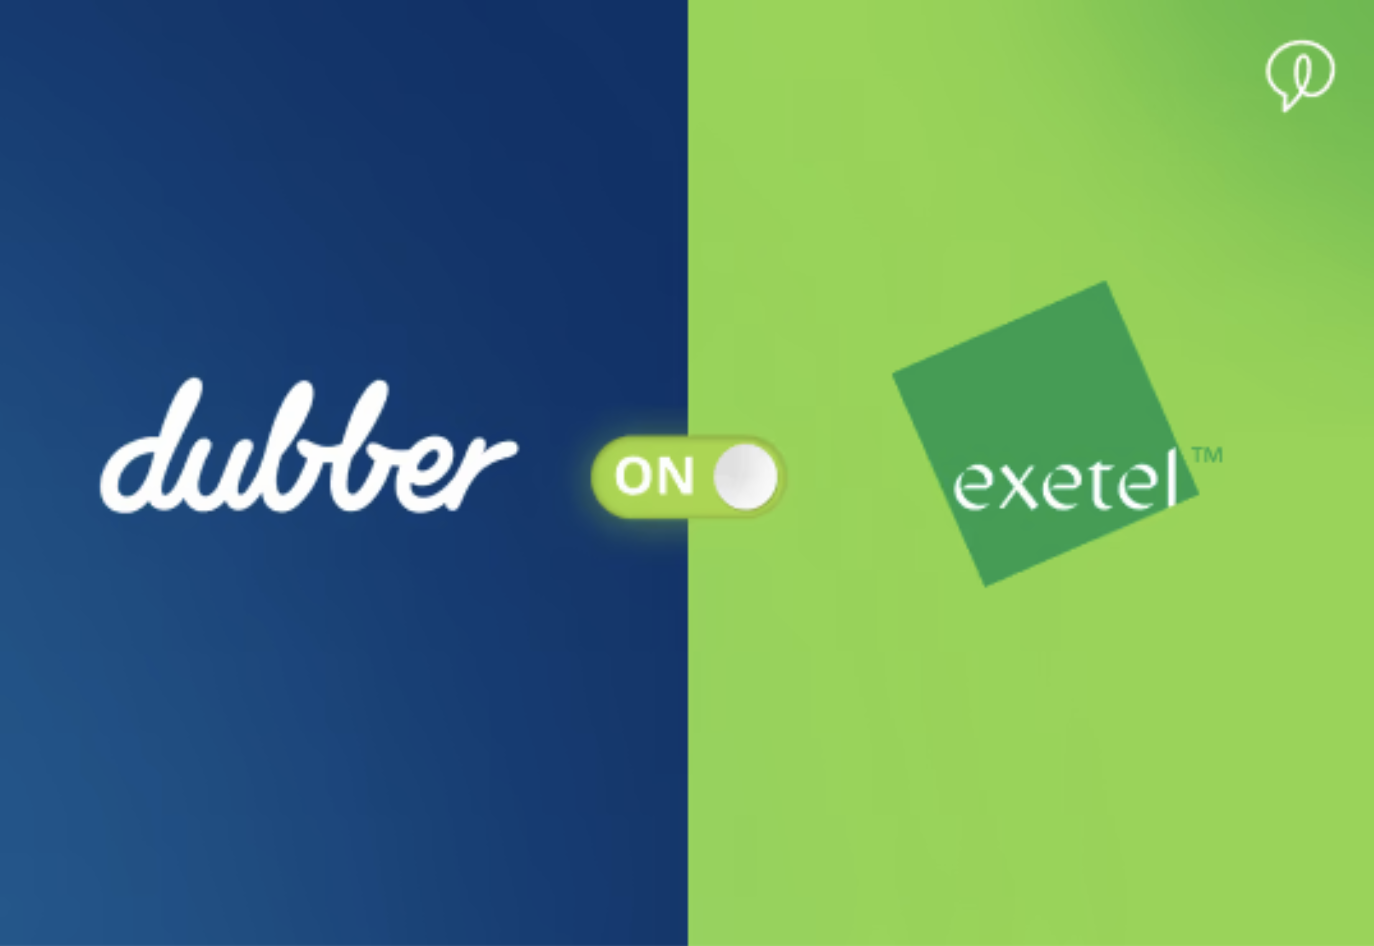 Exetel partners with Dubber to revolutionise customer experience with unique AI capabilities